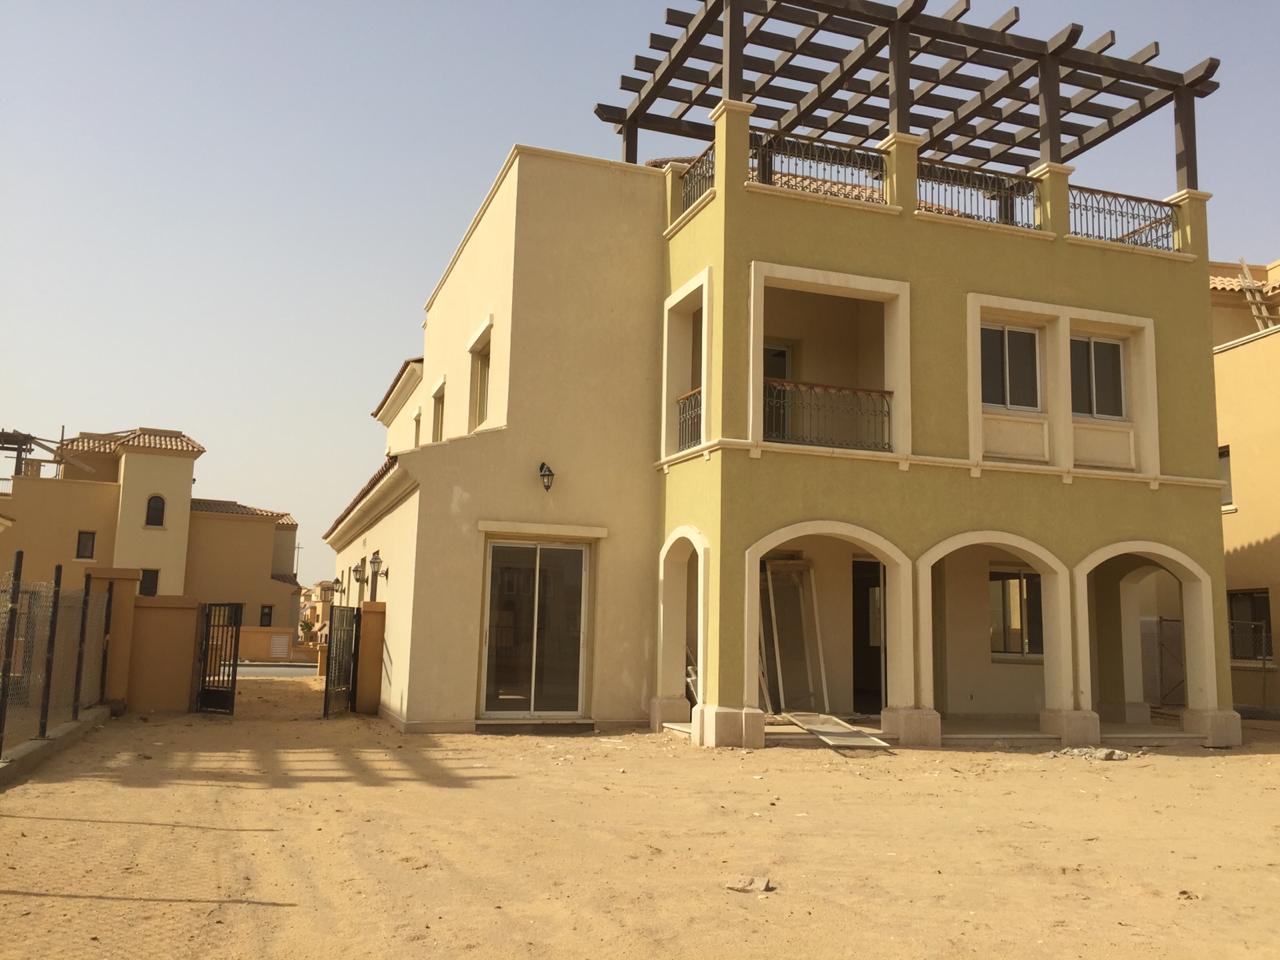 Standalone property for sale fully finished at Mivida